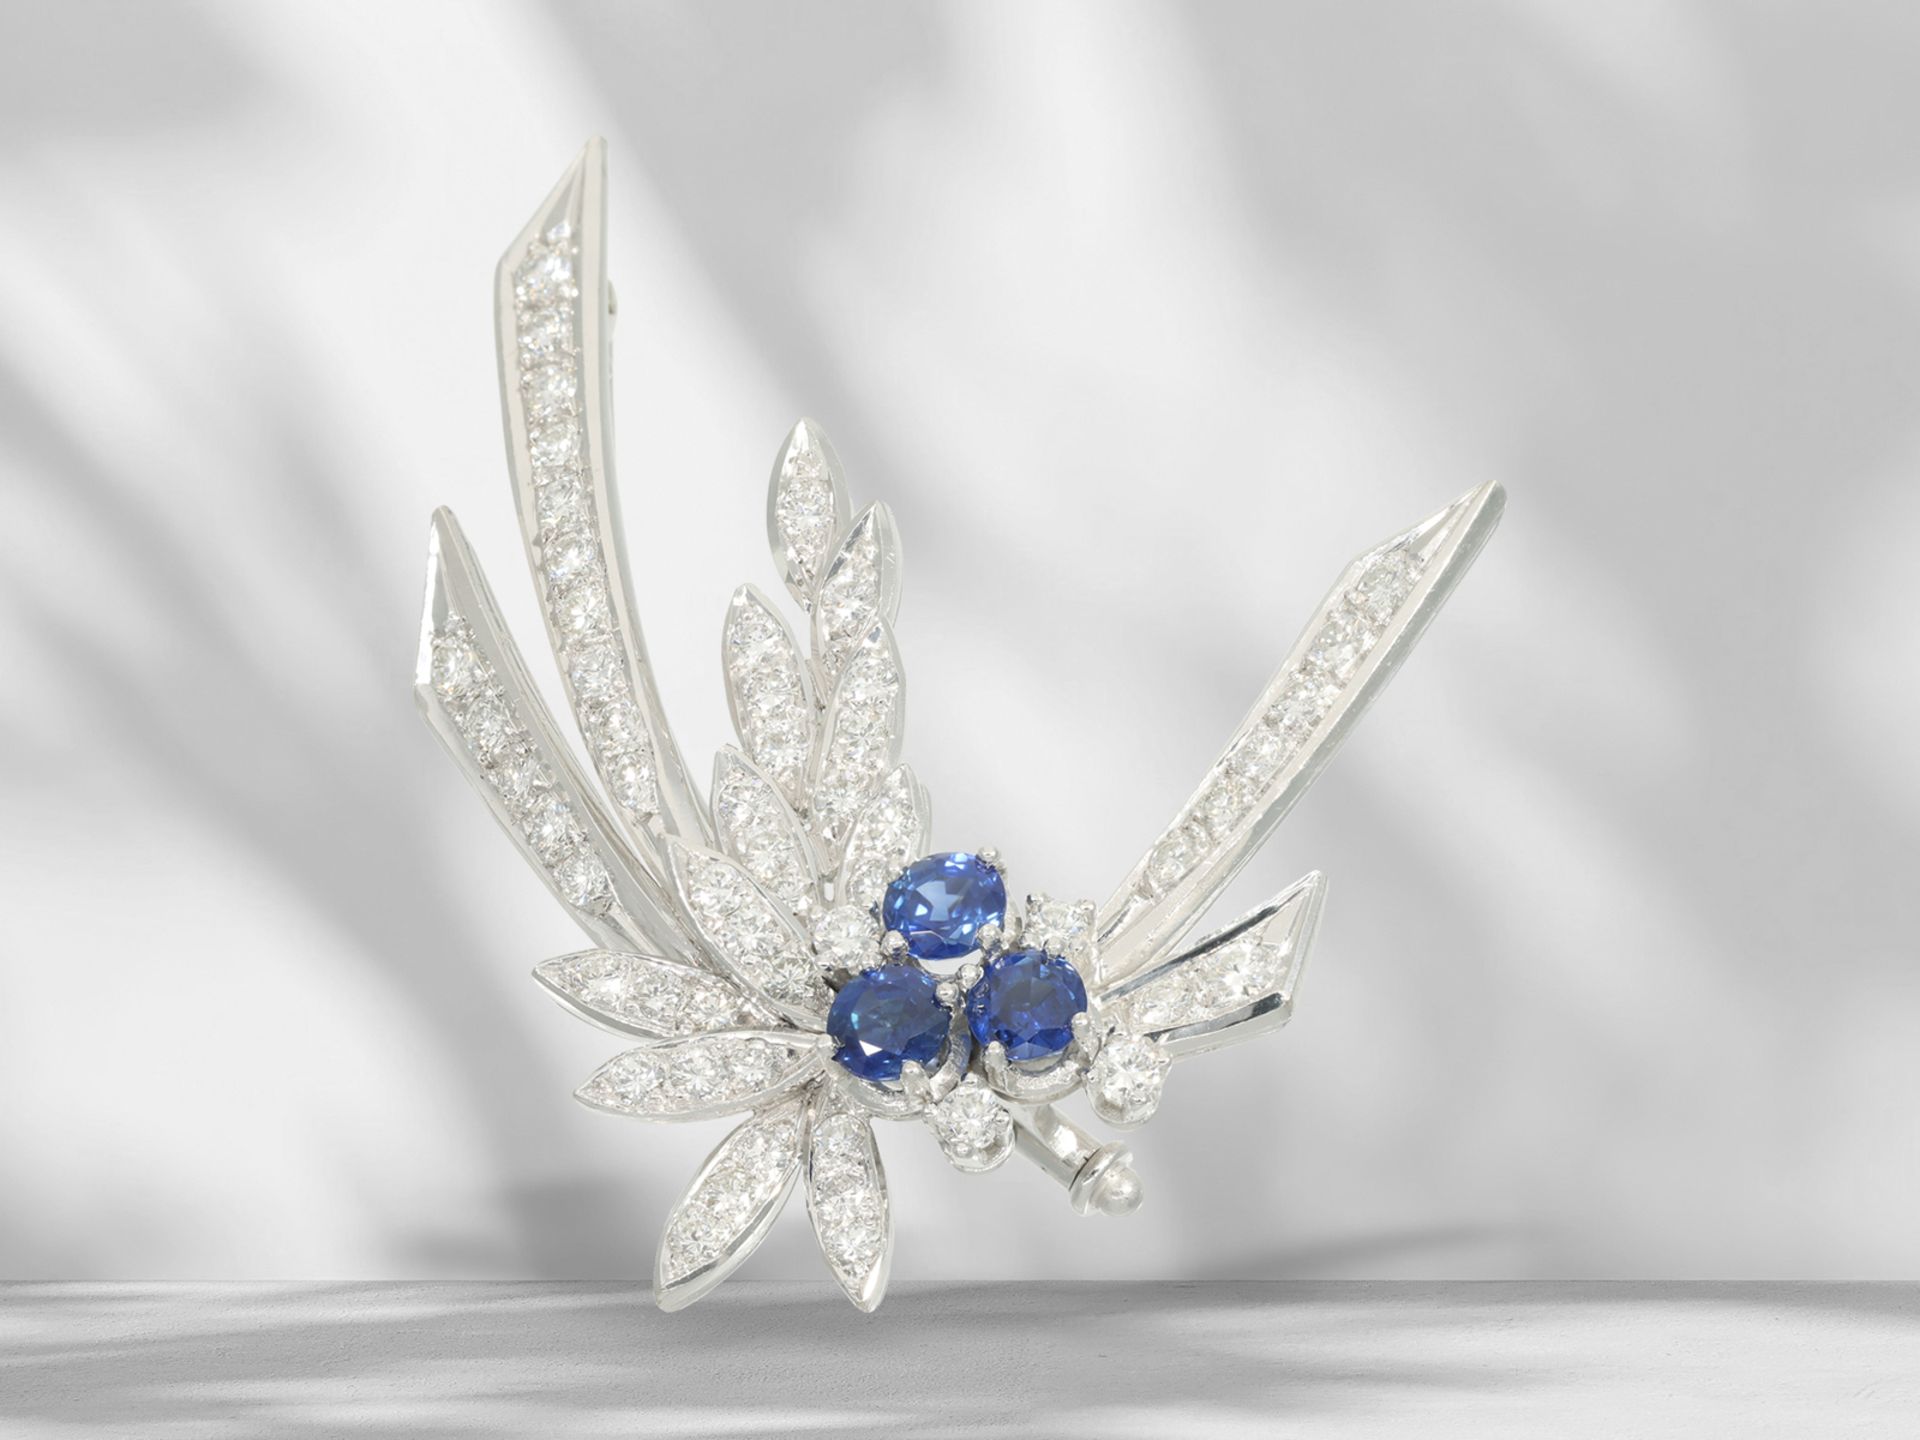 Brooch/pin: decorative vintage flower brooch in 18K white gold with sapphire and brilliant-cut diamo - Image 3 of 4